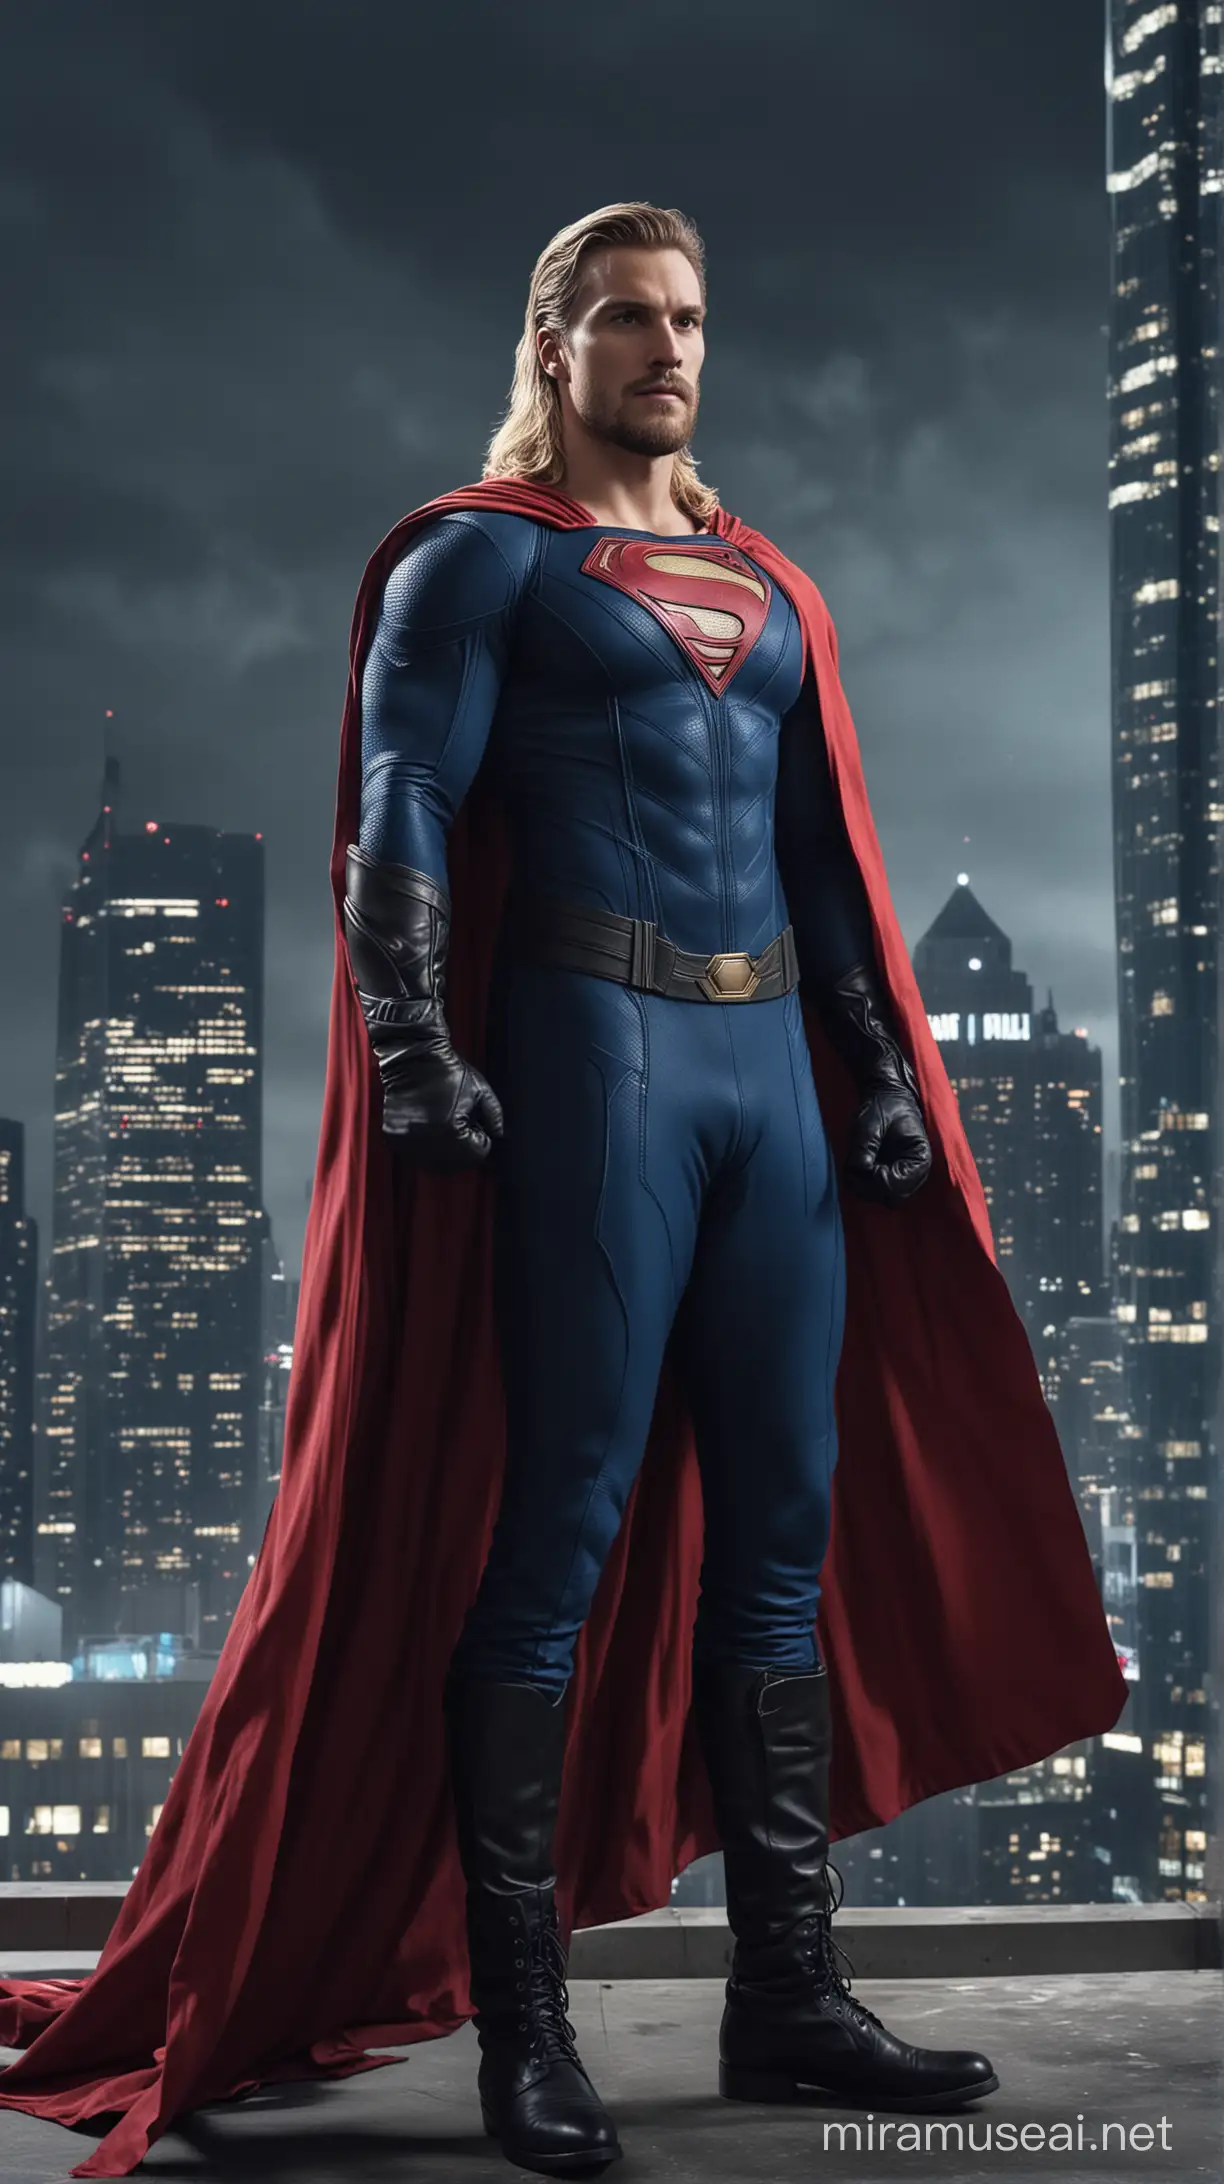 Chris Wood, the muscular superhero with his long cascading blond hair and bushy beard, stands in the heart of a modern skyscraper on a cloudy night. His tight-fitting red suit clings to his chiseled physique, while a long, flowing blue cape billows behind him as he moves. Black leather boots and gloves complete his stylish superhero ensemble as he prepares to face whatever danger lurks in the shadows of the city's darkest corners.
